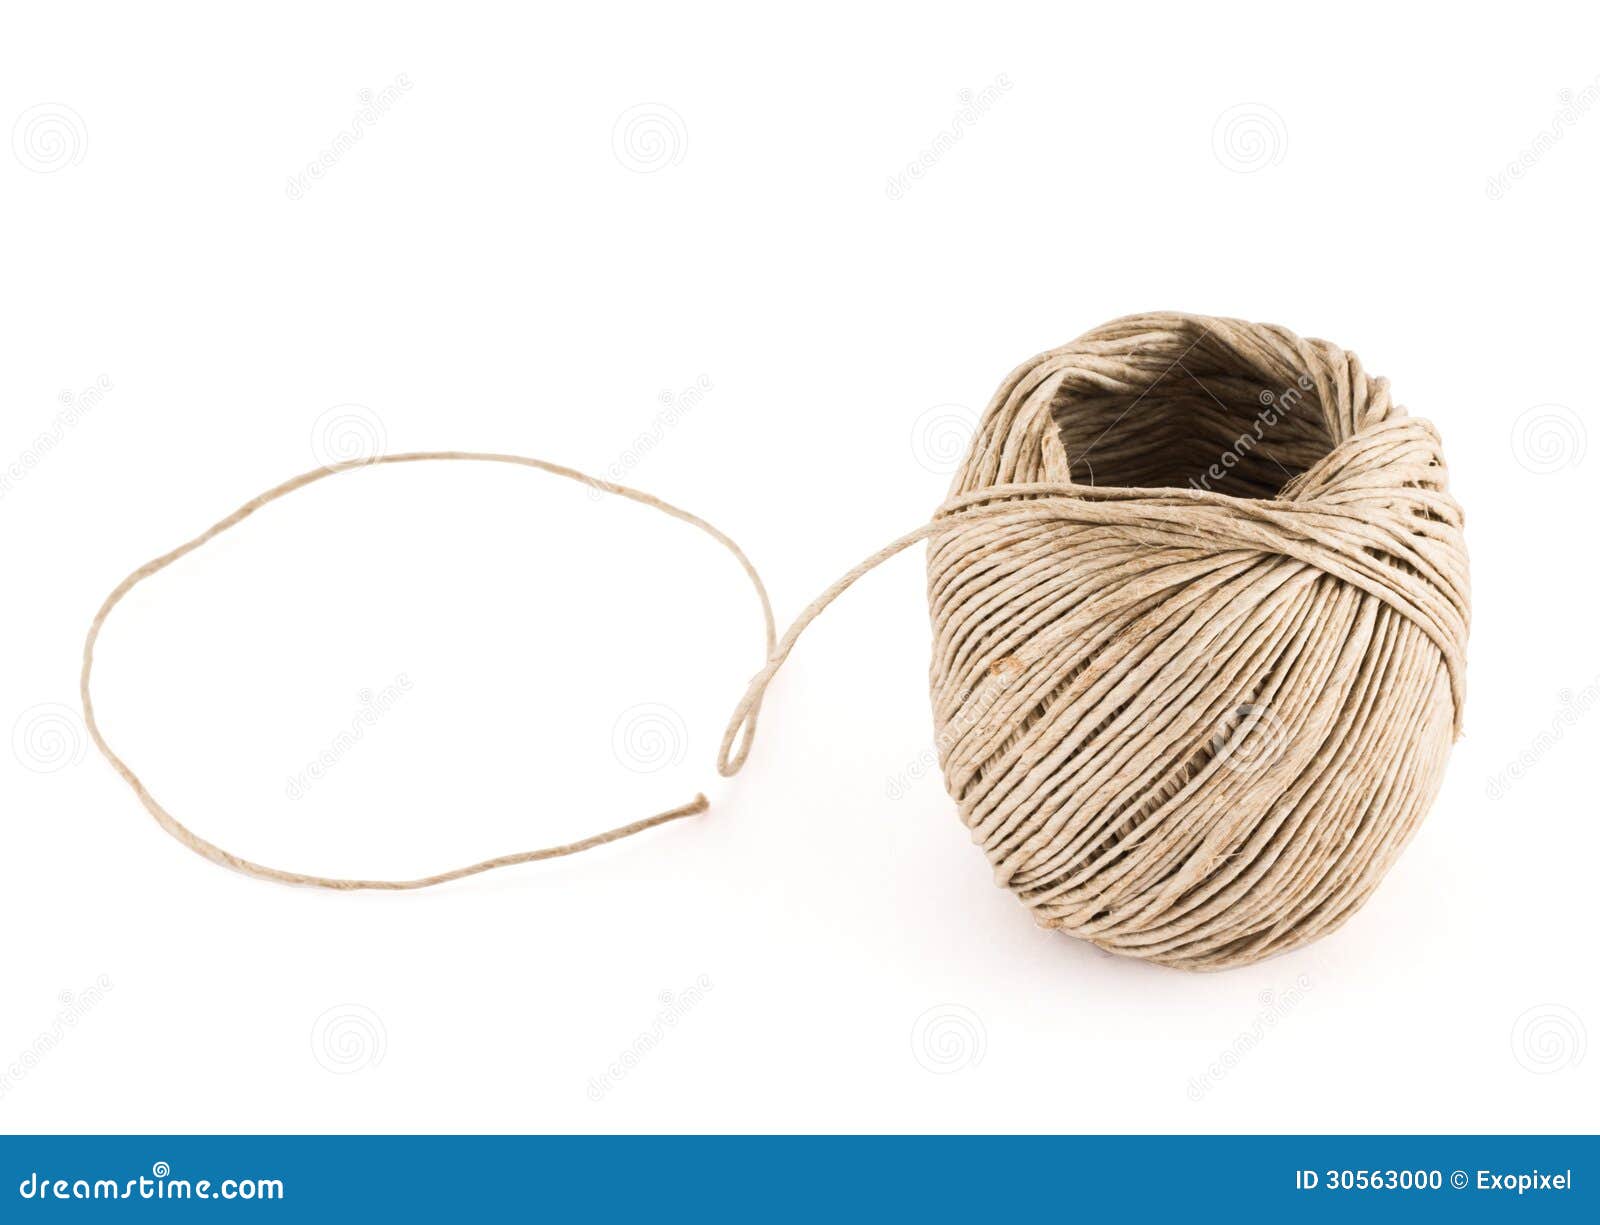 Ball of Strong Brown String Over White Background Stock Photo - Image of  ball, craft: 30563000